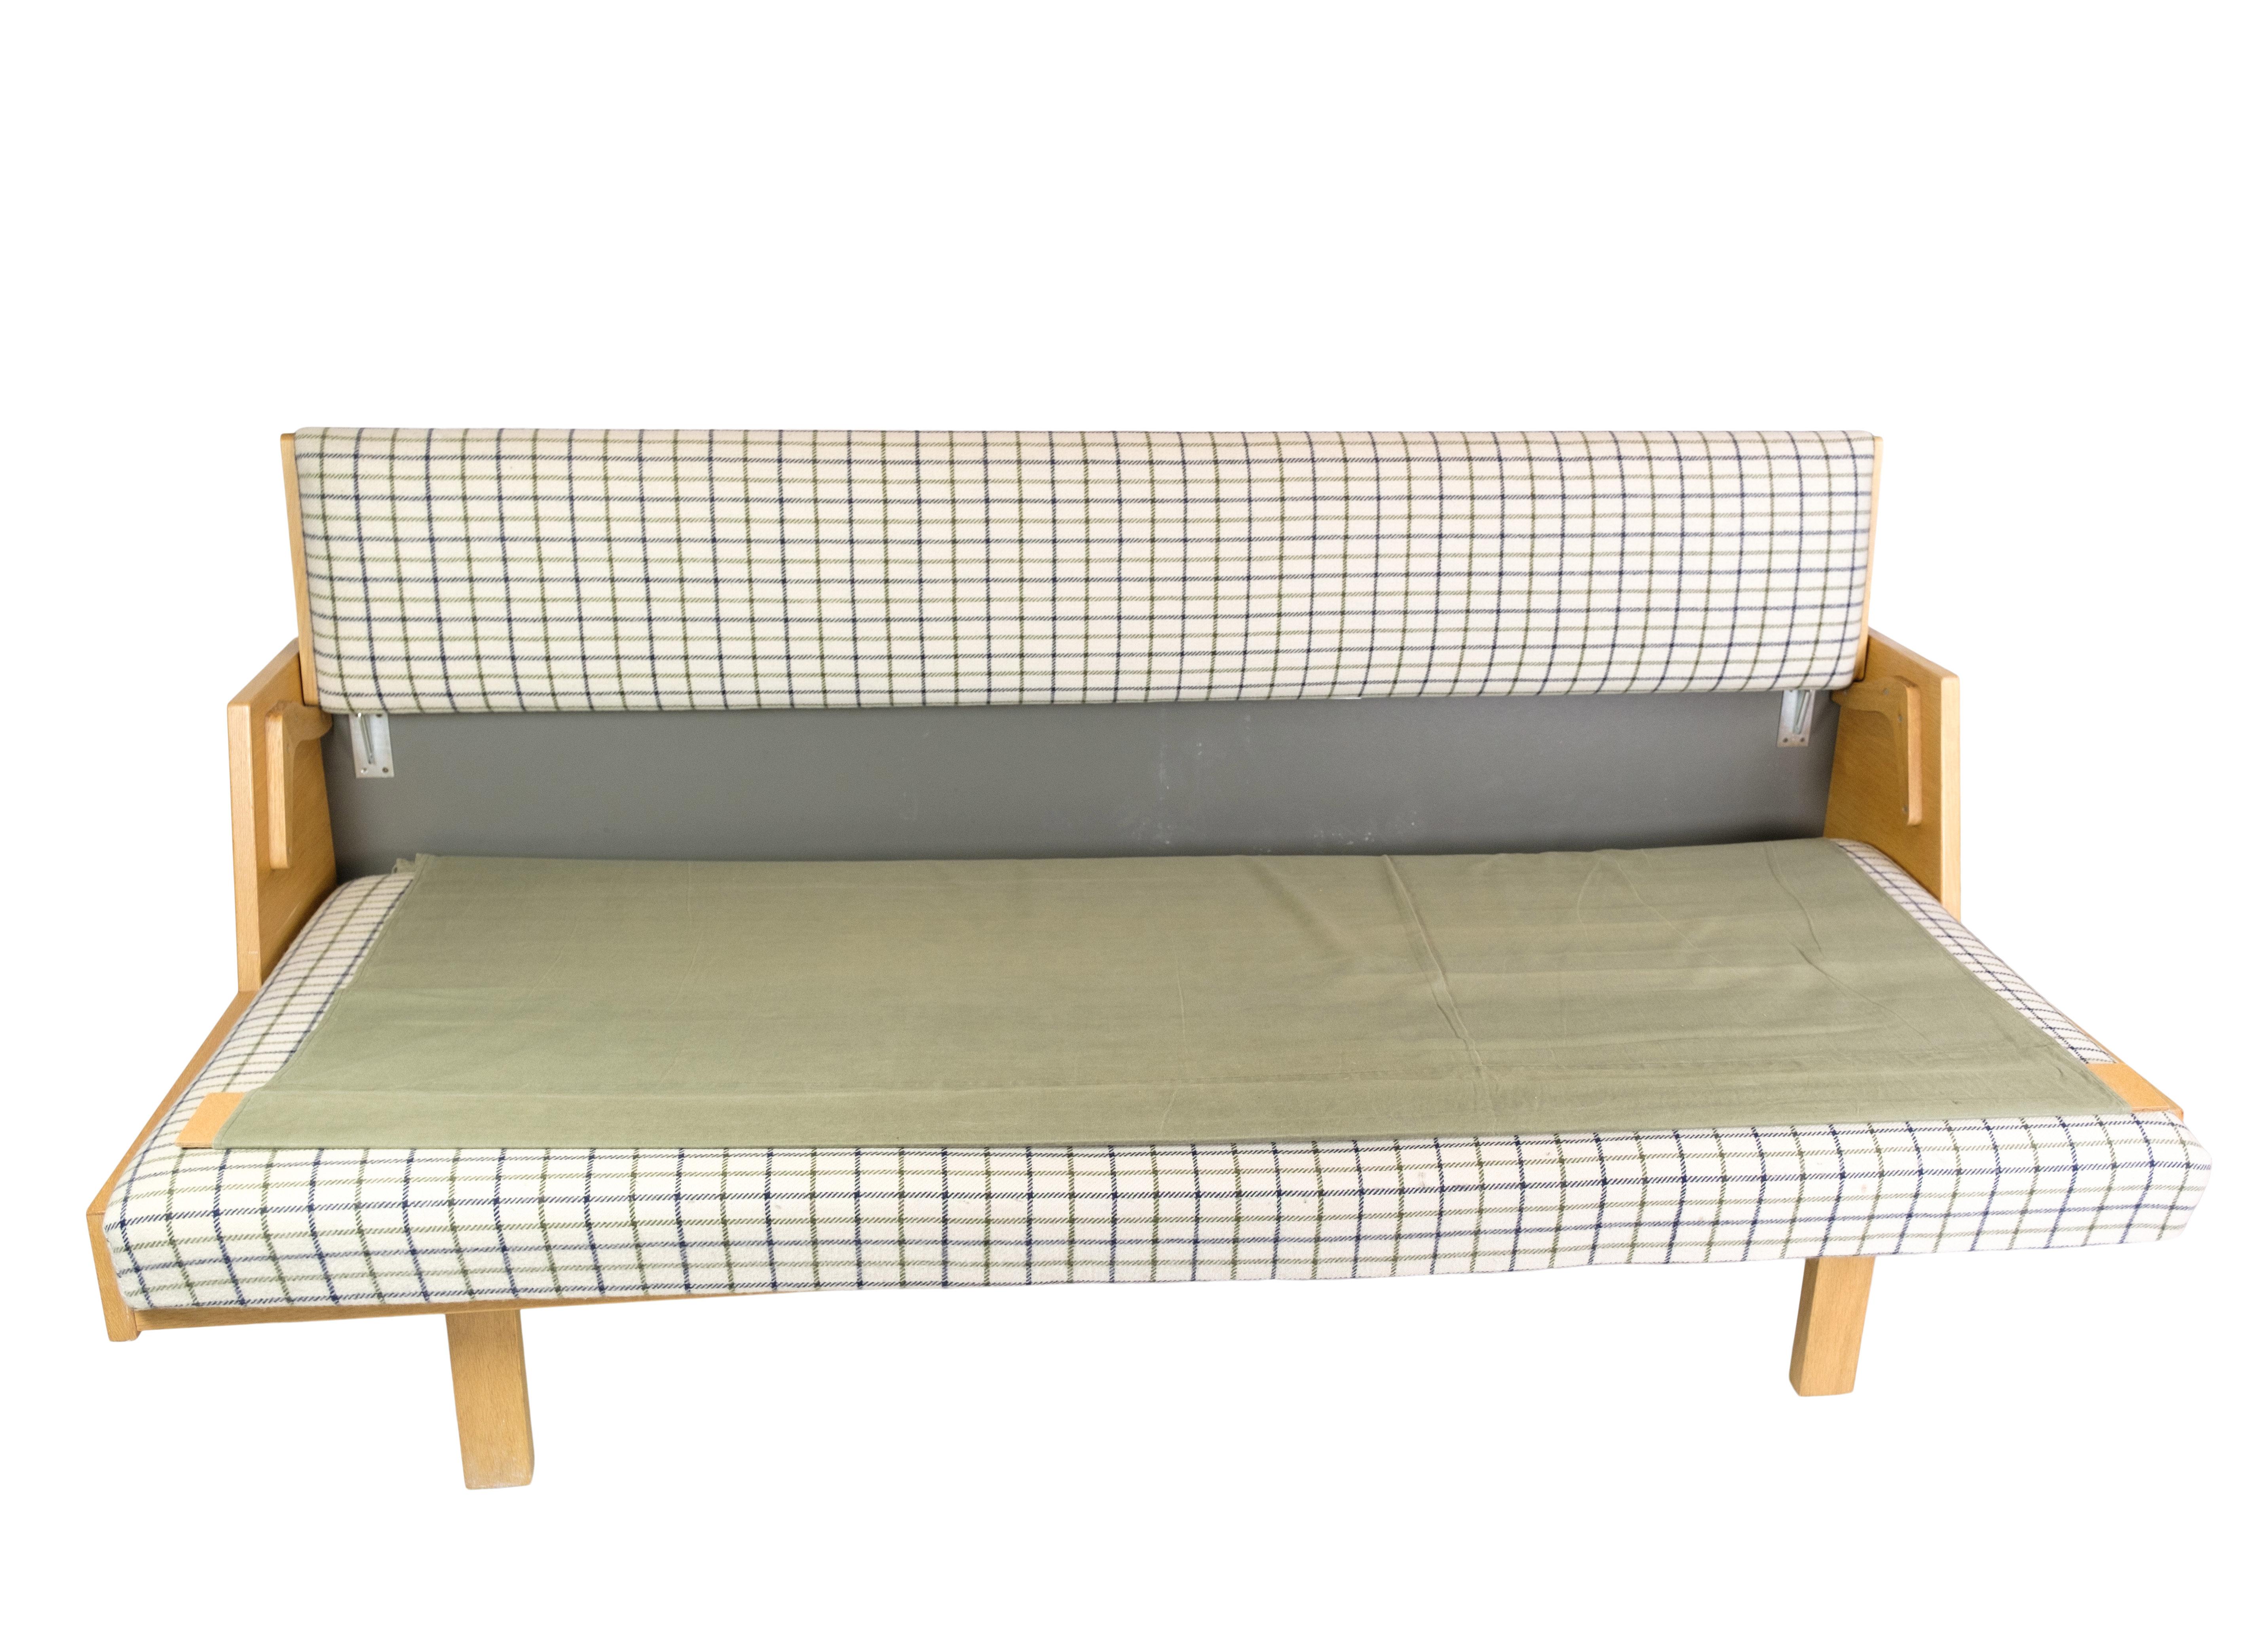 Mid-Century Modern Daybed/Sofa Made In Oak Designed by Hans J. Wegner From 1960s For Sale